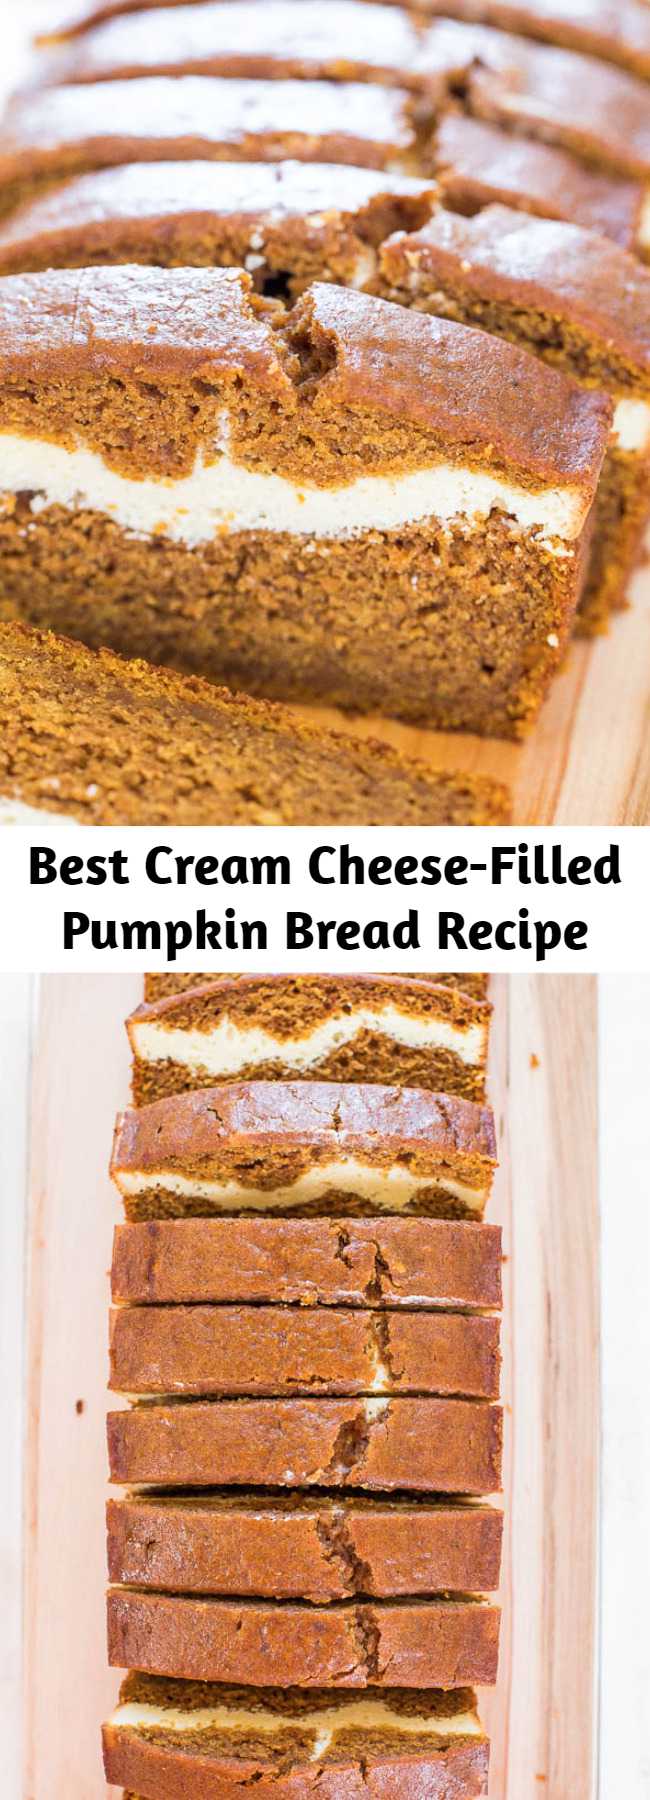 Best Cream Cheese-Filled Pumpkin Bread Recipe - This is without a doubt the BEST pumpkin bread recipe! This pumpkin cream cheese bread tastes like it has cheesecake baked into the middle. You’ll definitely want a second slice! #pumpkindesserts #pumpkinrecipes